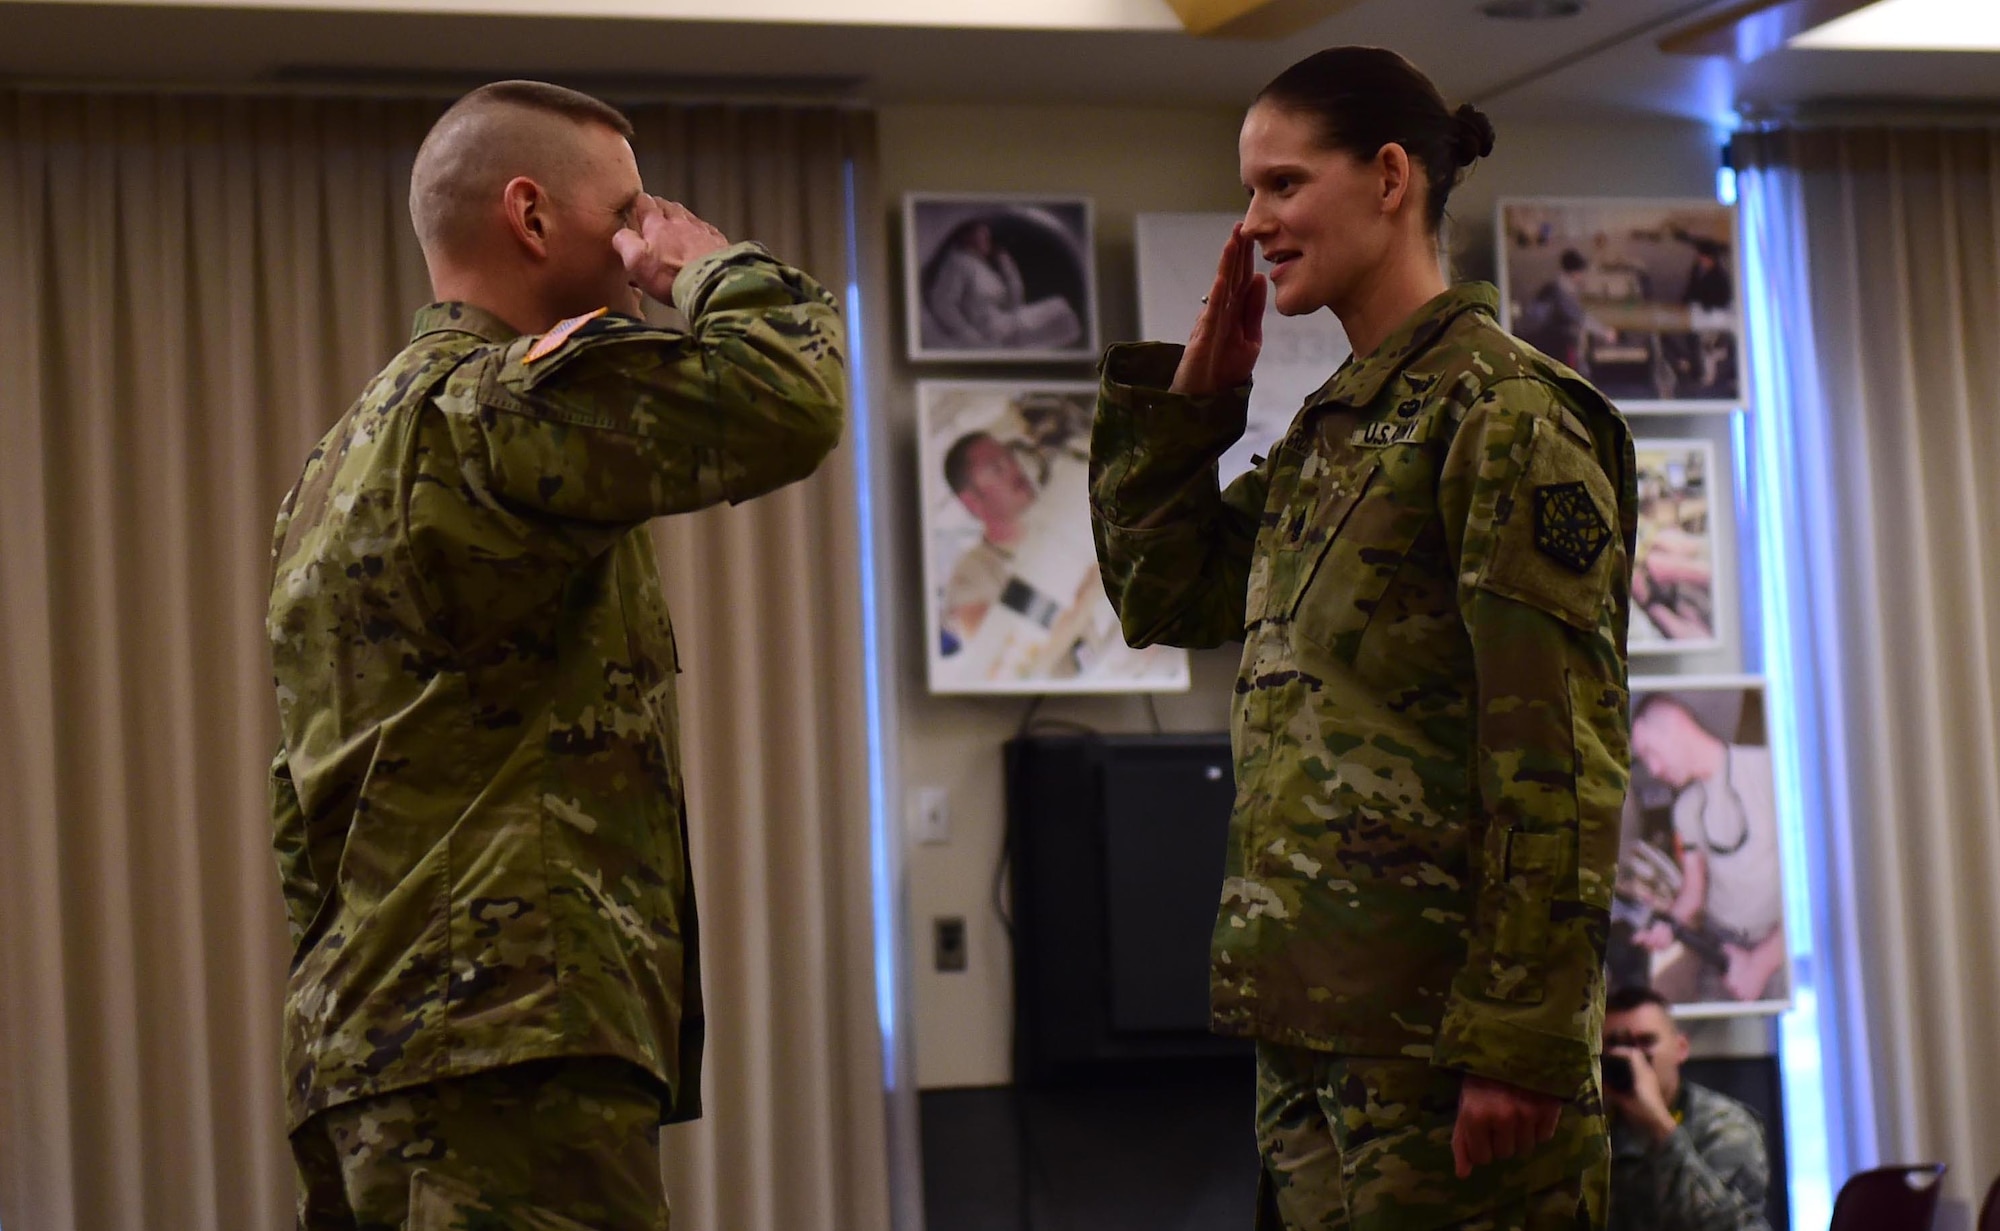 Command Sgt. Maj. Kristin Grover, incoming 743d Military Intelligence Battalion command sergeant major, salutes Sgt. Maj. Garth Newell, commander of troops, before taking command of the battalion Feb. 5, 2016, at Building 706 on Buckley Air Force Base. Command Sgt. Maj. Raymond S. Ramsey, the outgoing 743d MI Battalion command sergeant major, relinquished command to Grover during a change of responsibility ceremony. (U.S. Air Force photo by Airman 1st Class Gabrielle Spradling/Released)